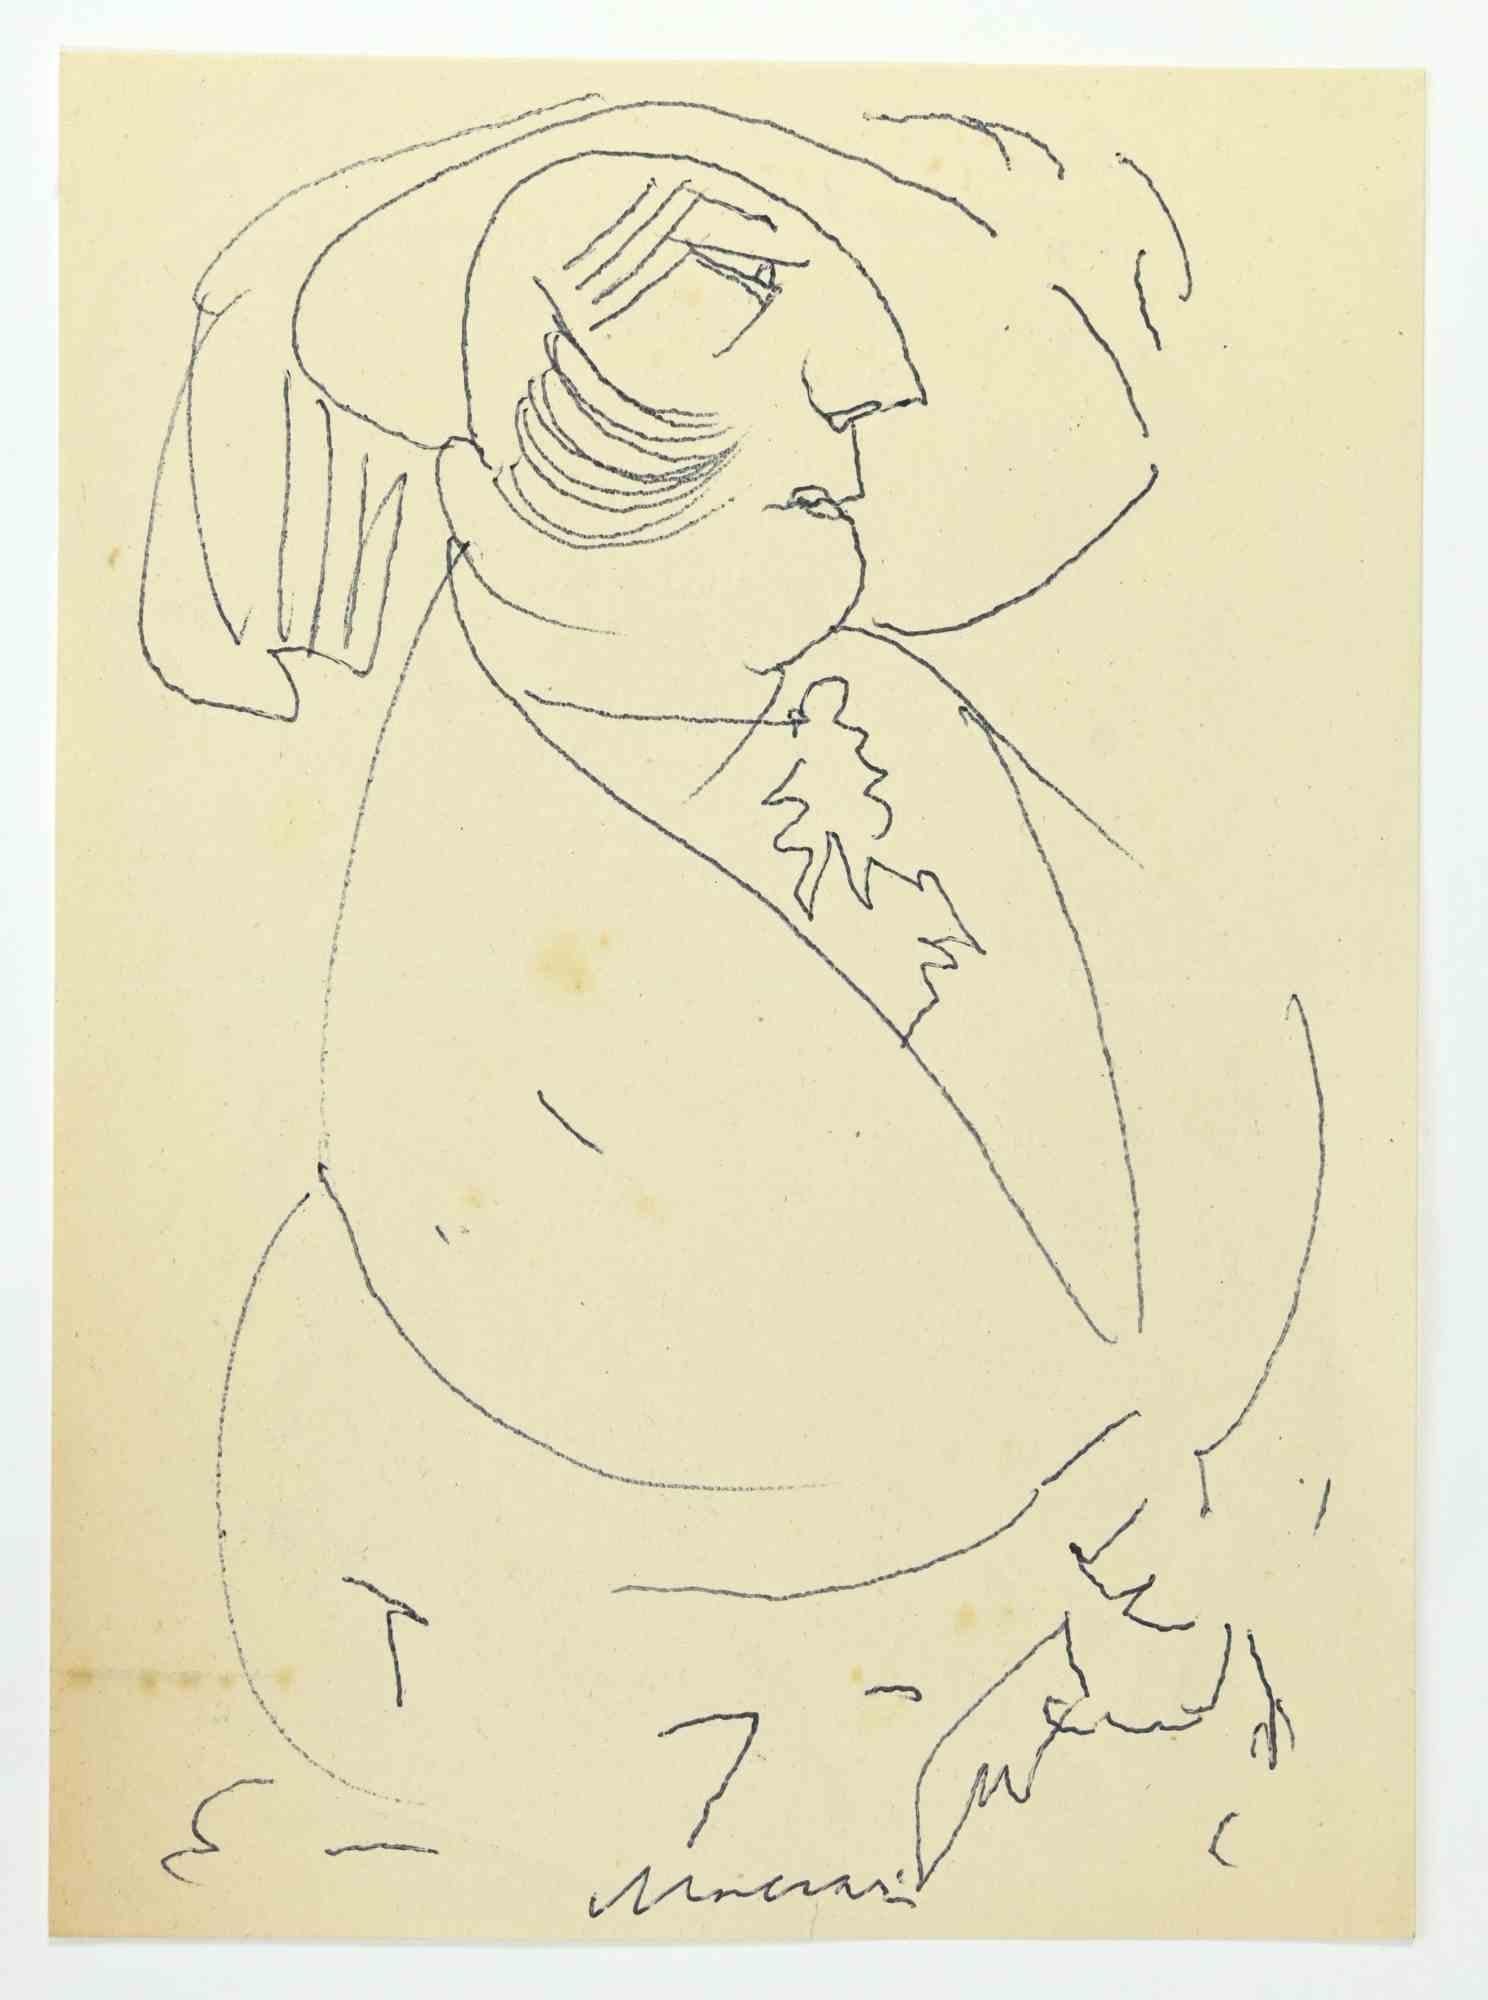 The Lady is a China Ink Drawing realized by Mino Maccari  (1924-1989) in the 1960s.

Hand-signed on the lower.

Good conditions.

Mino Maccari (Siena, 1924-Rome, June 16, 1989) was an Italian writer, painter, engraver and journalist, winner of the